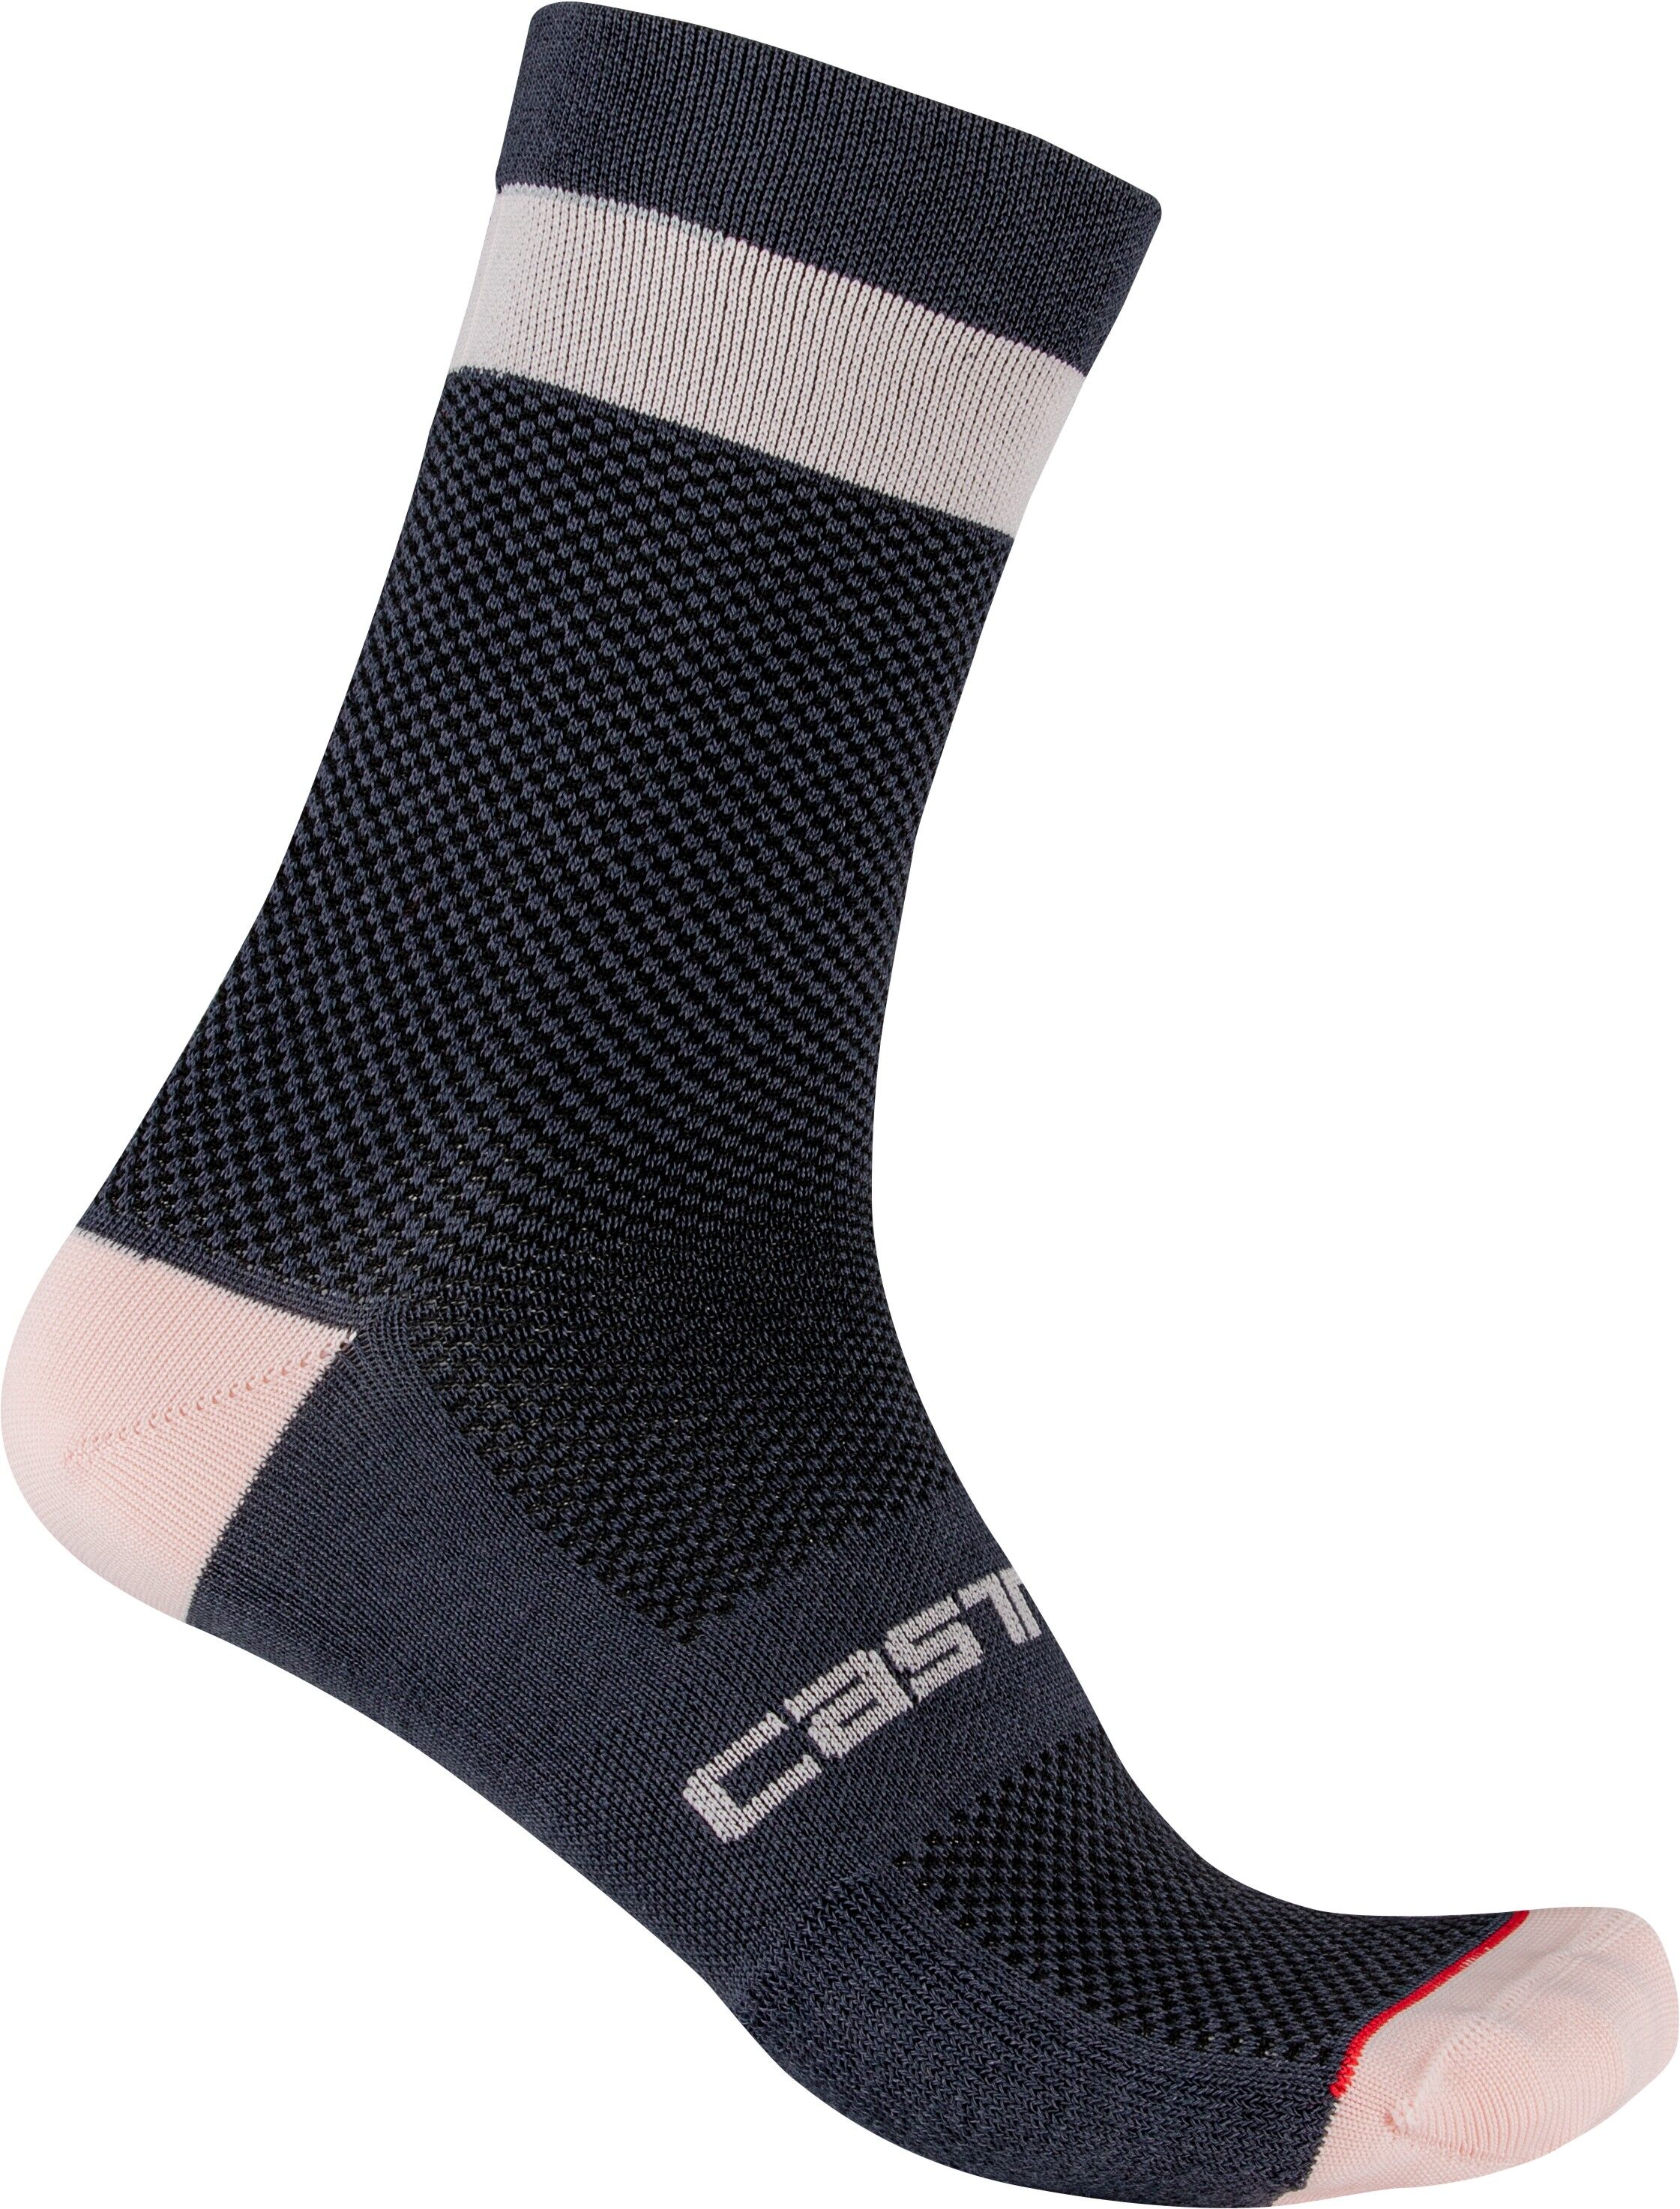 Castelli Alpha W 15 Sock - Calcetines ciclismo - Mujer